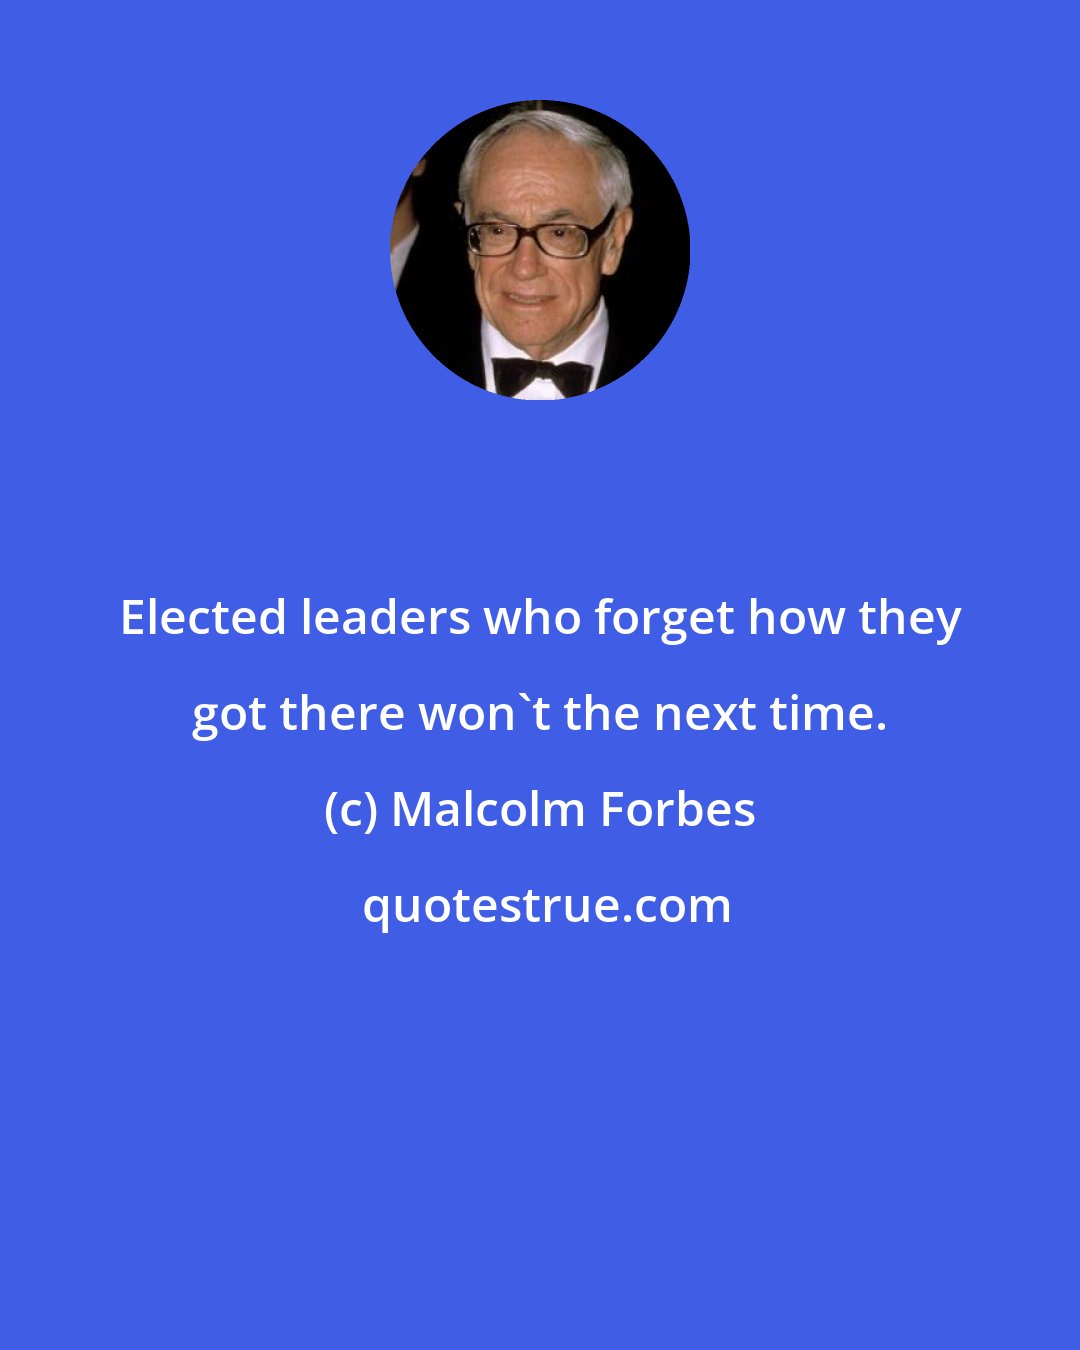 Malcolm Forbes: Elected leaders who forget how they got there won't the next time.